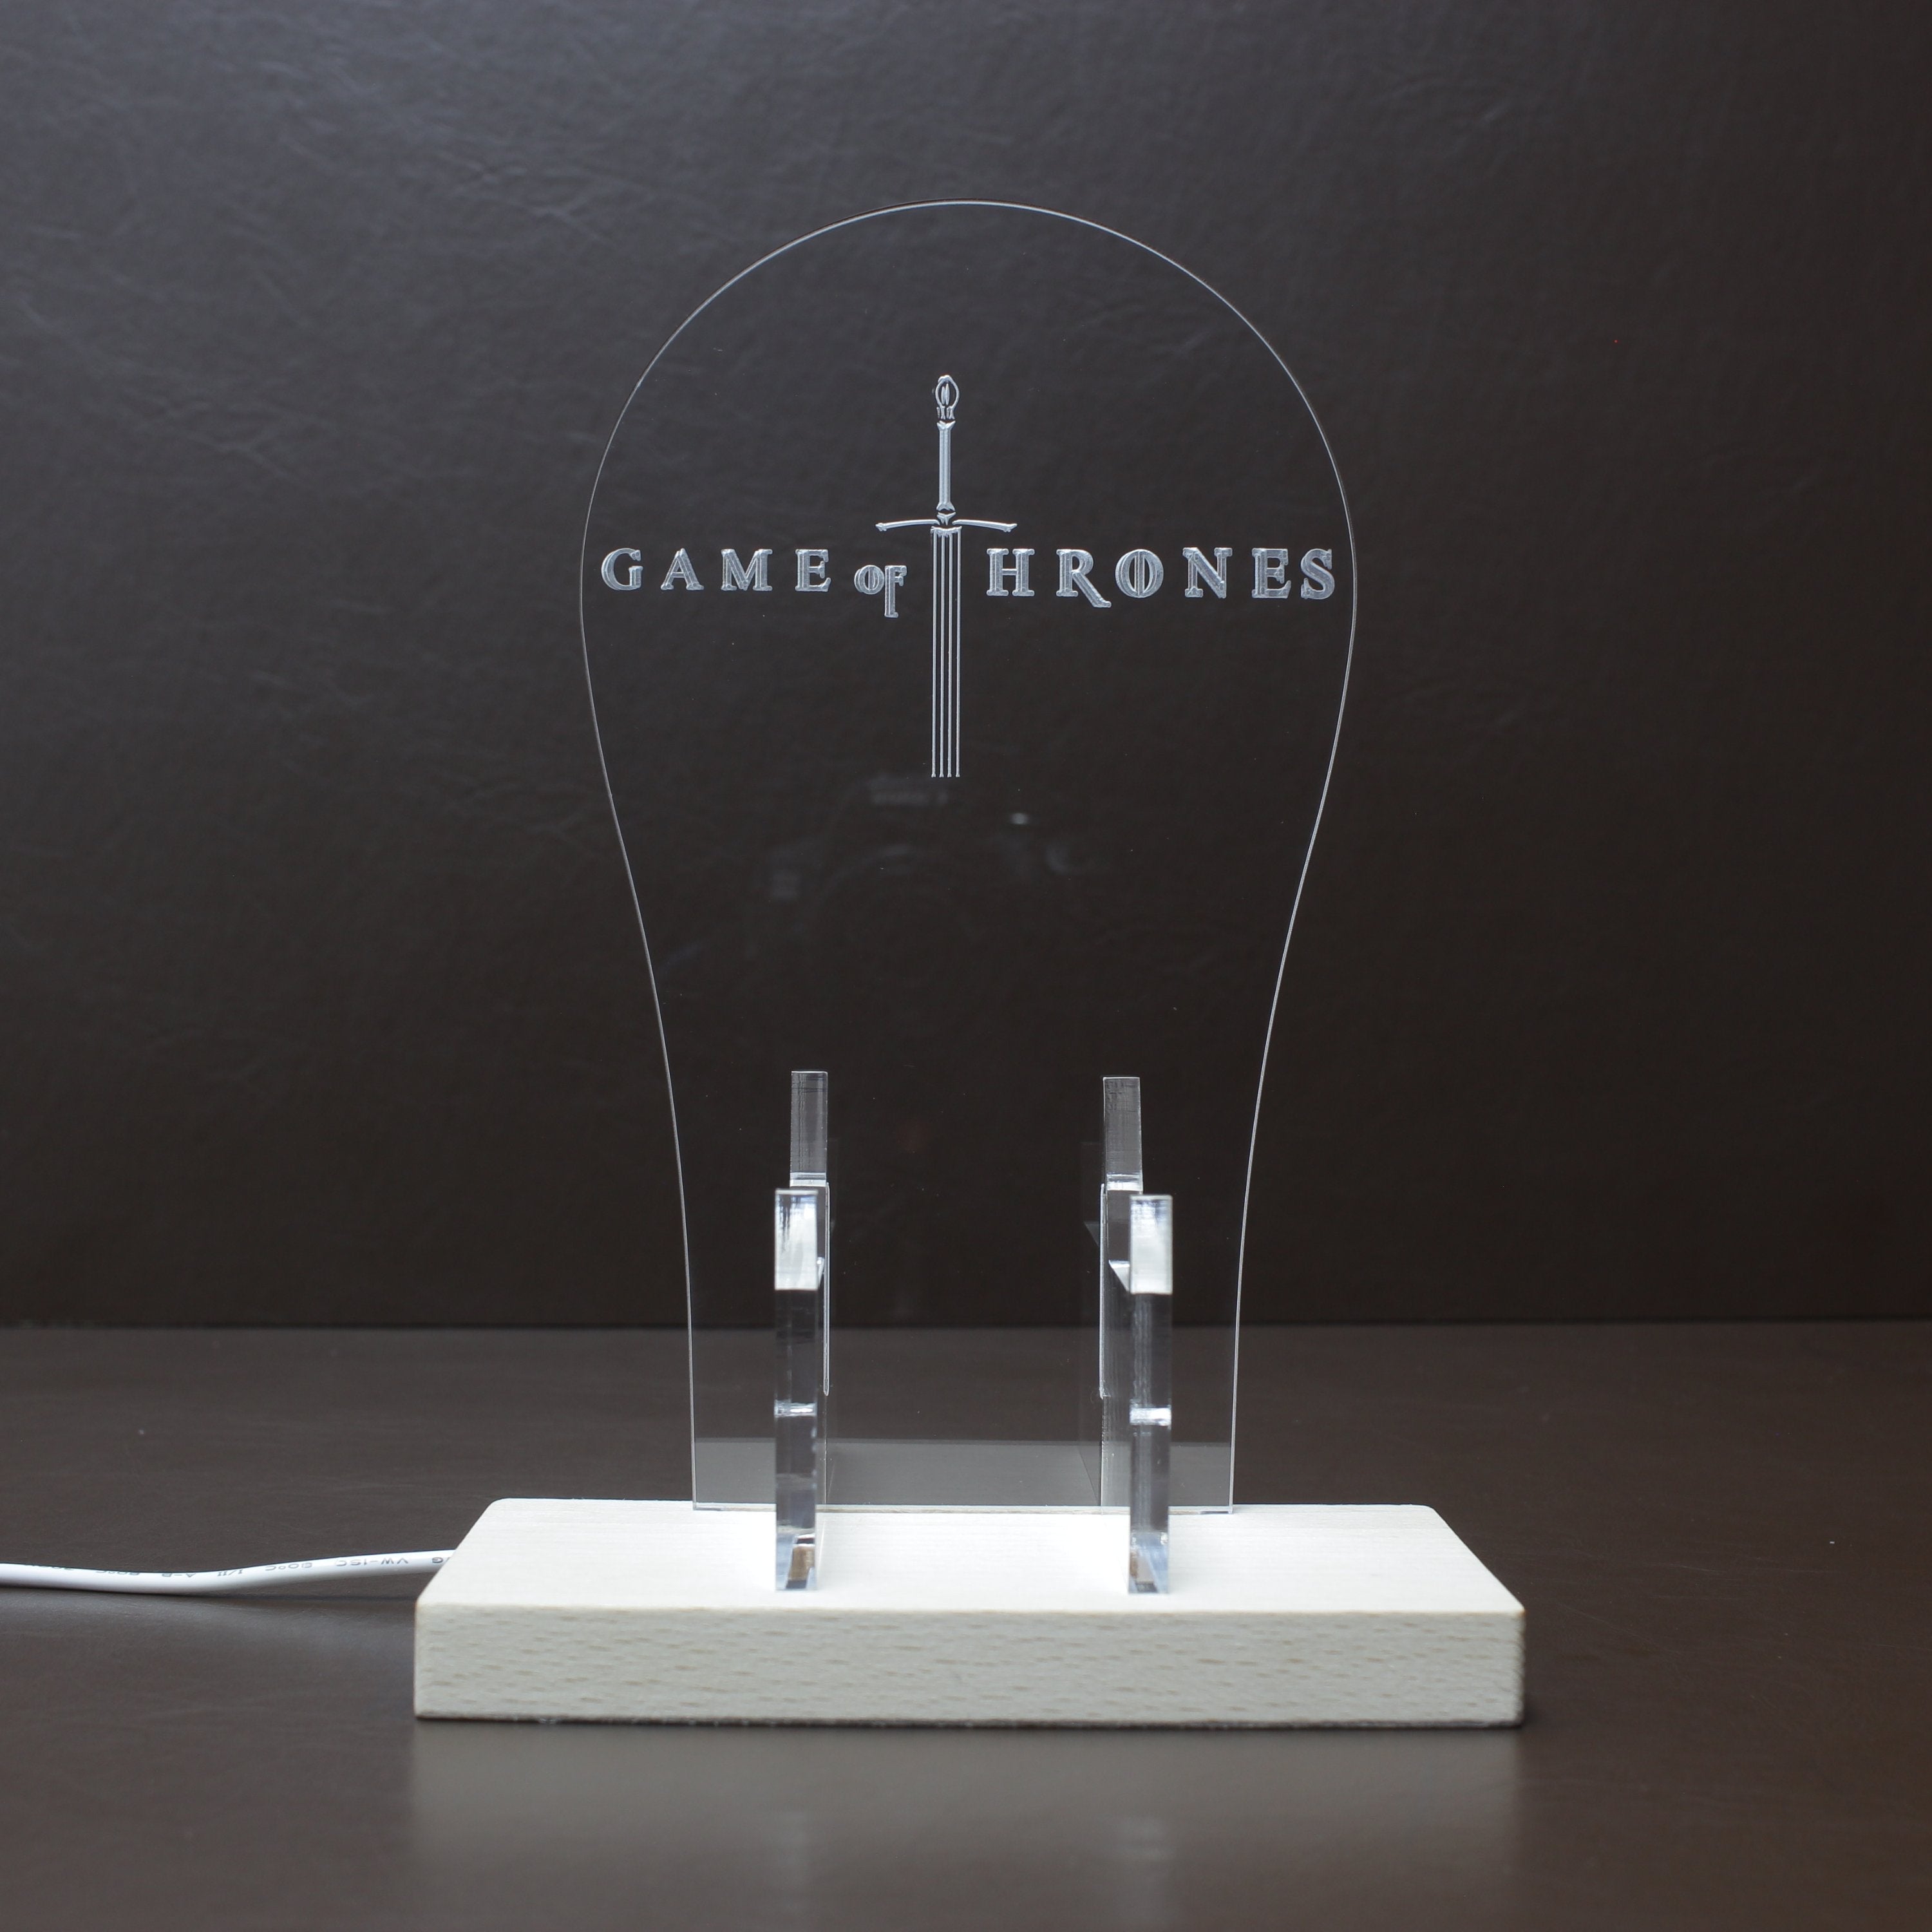 Game of Thrones LED Gaming Headset Controller Stand